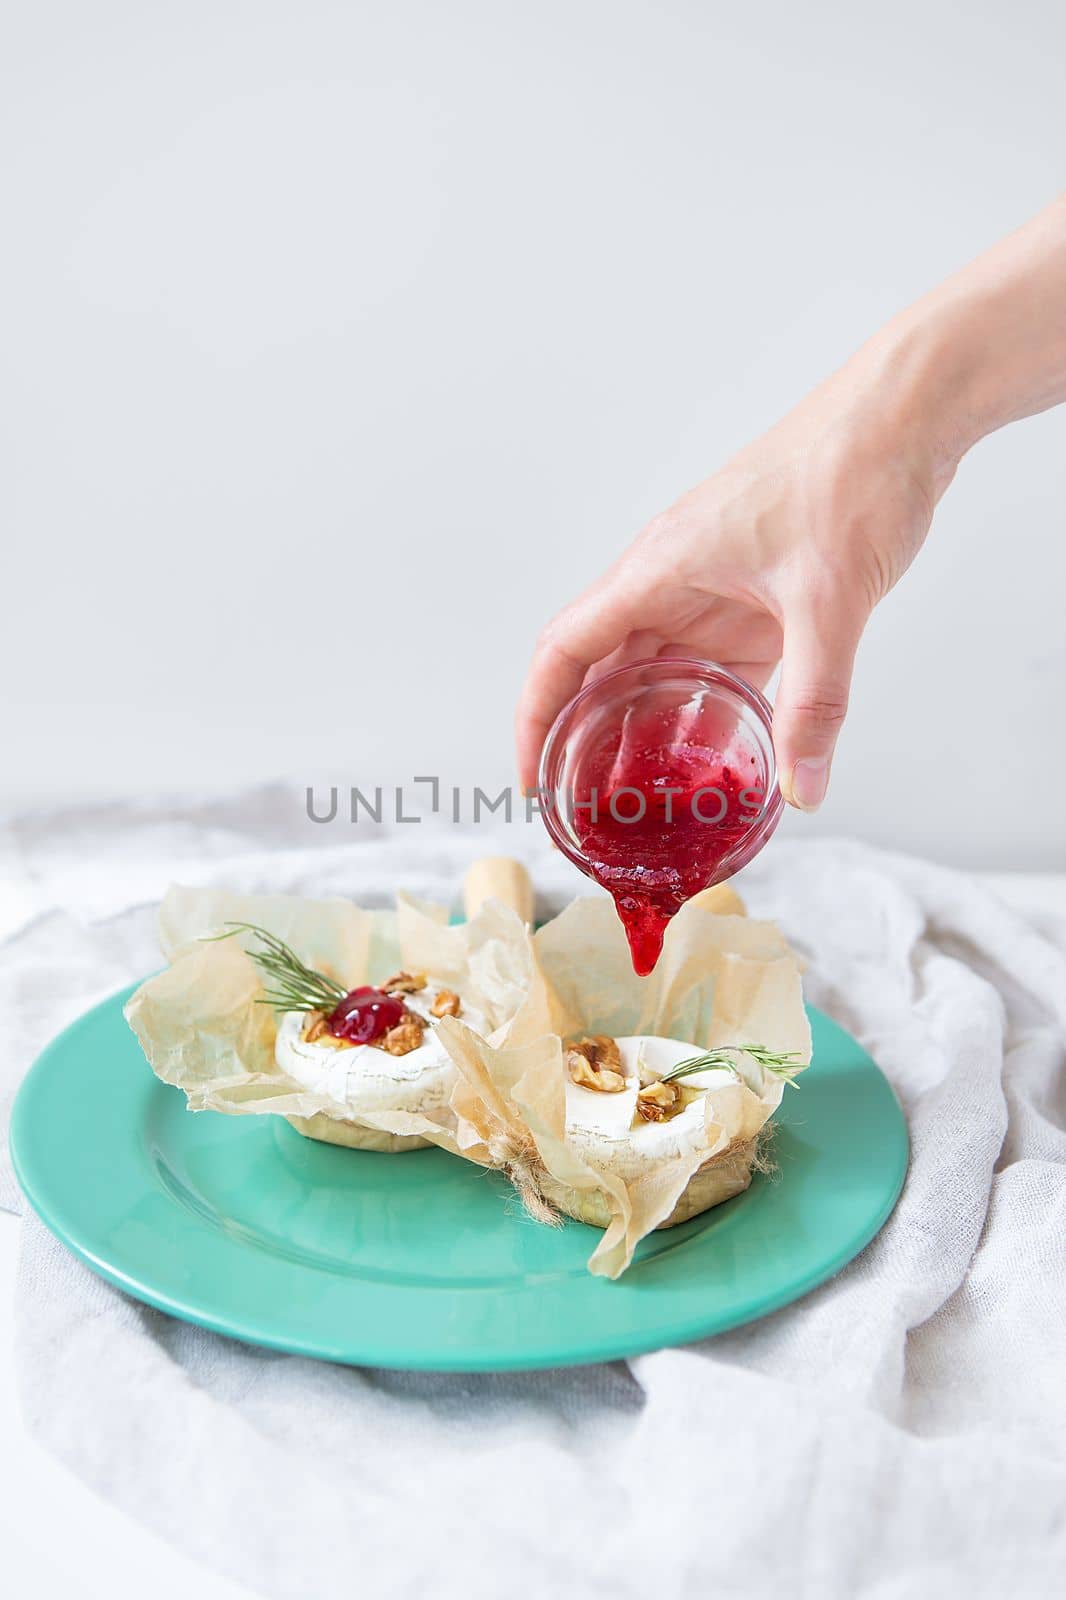 Baked camembert with walnuts, honey and rosemary wrapped in parchment lies on a green plate, a girl pours cranberry jam into the cheese, delicious and healthy food